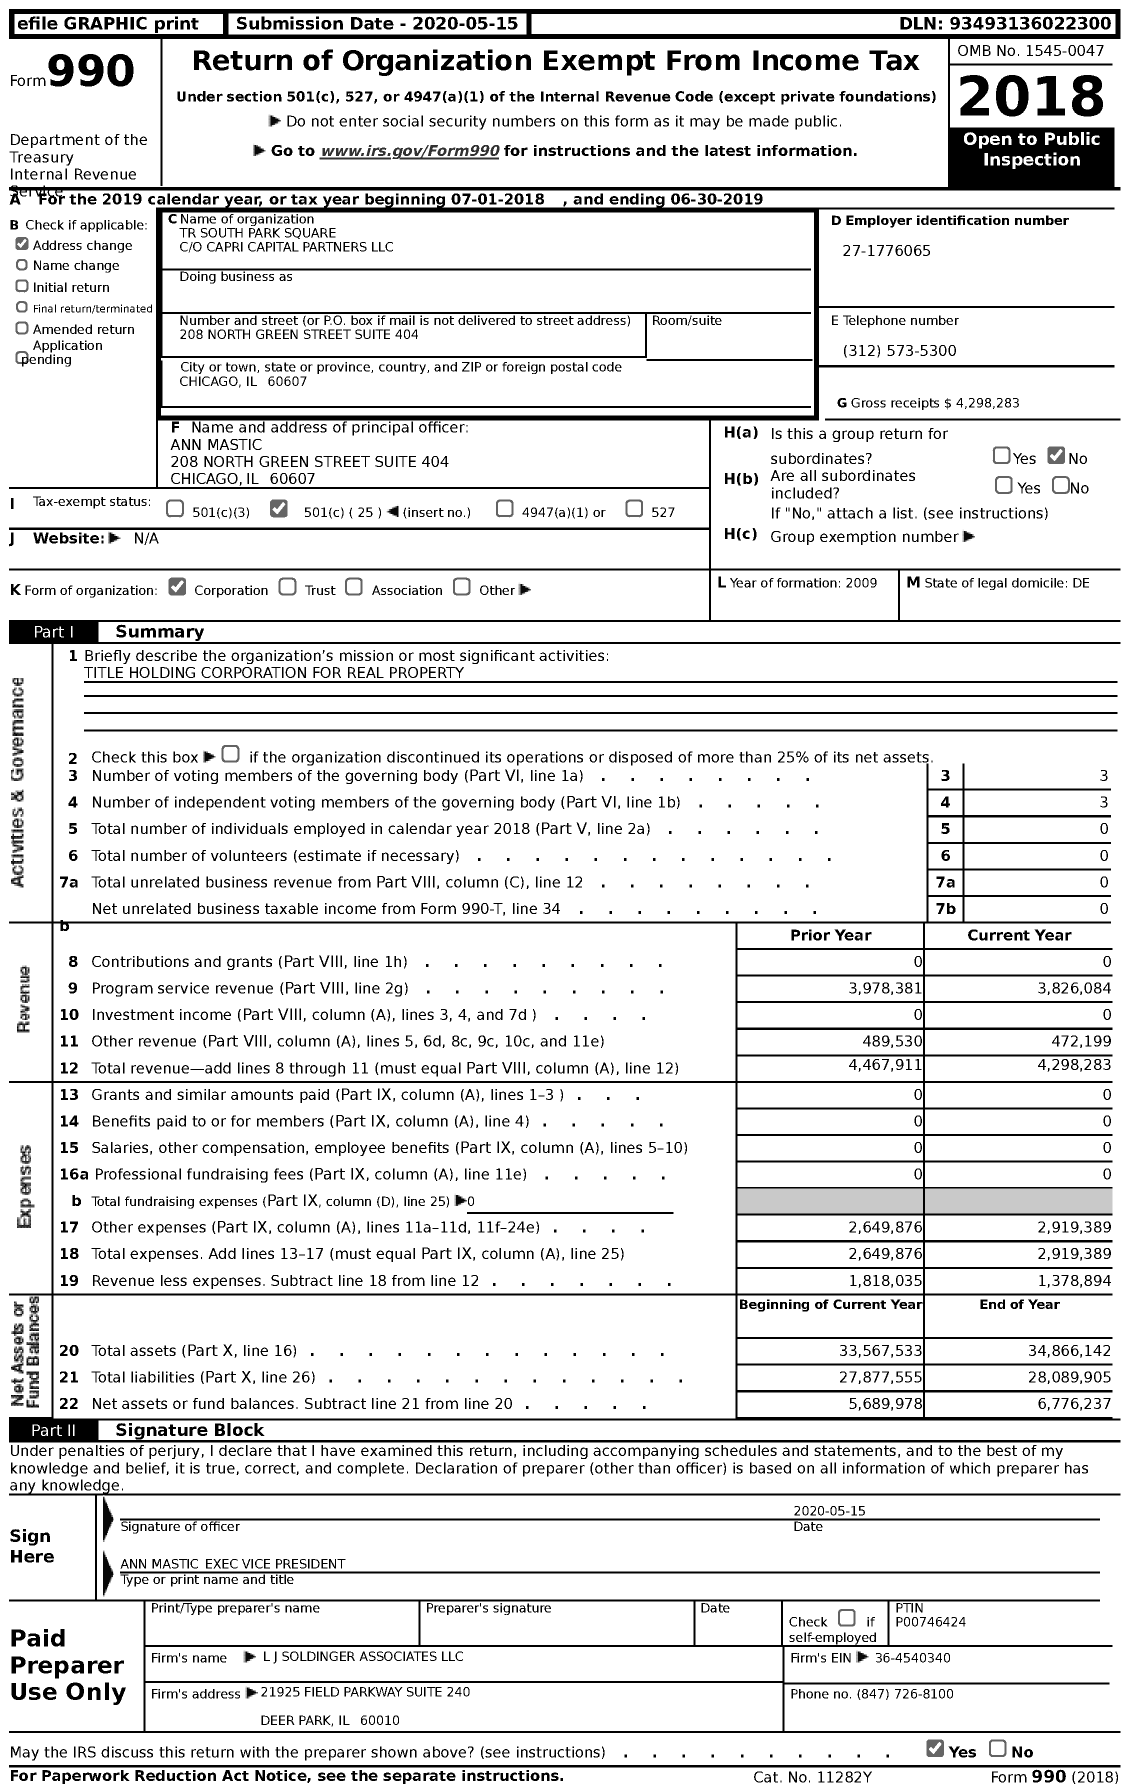 Image of first page of 2018 Form 990 for TR South Park Square Corporation